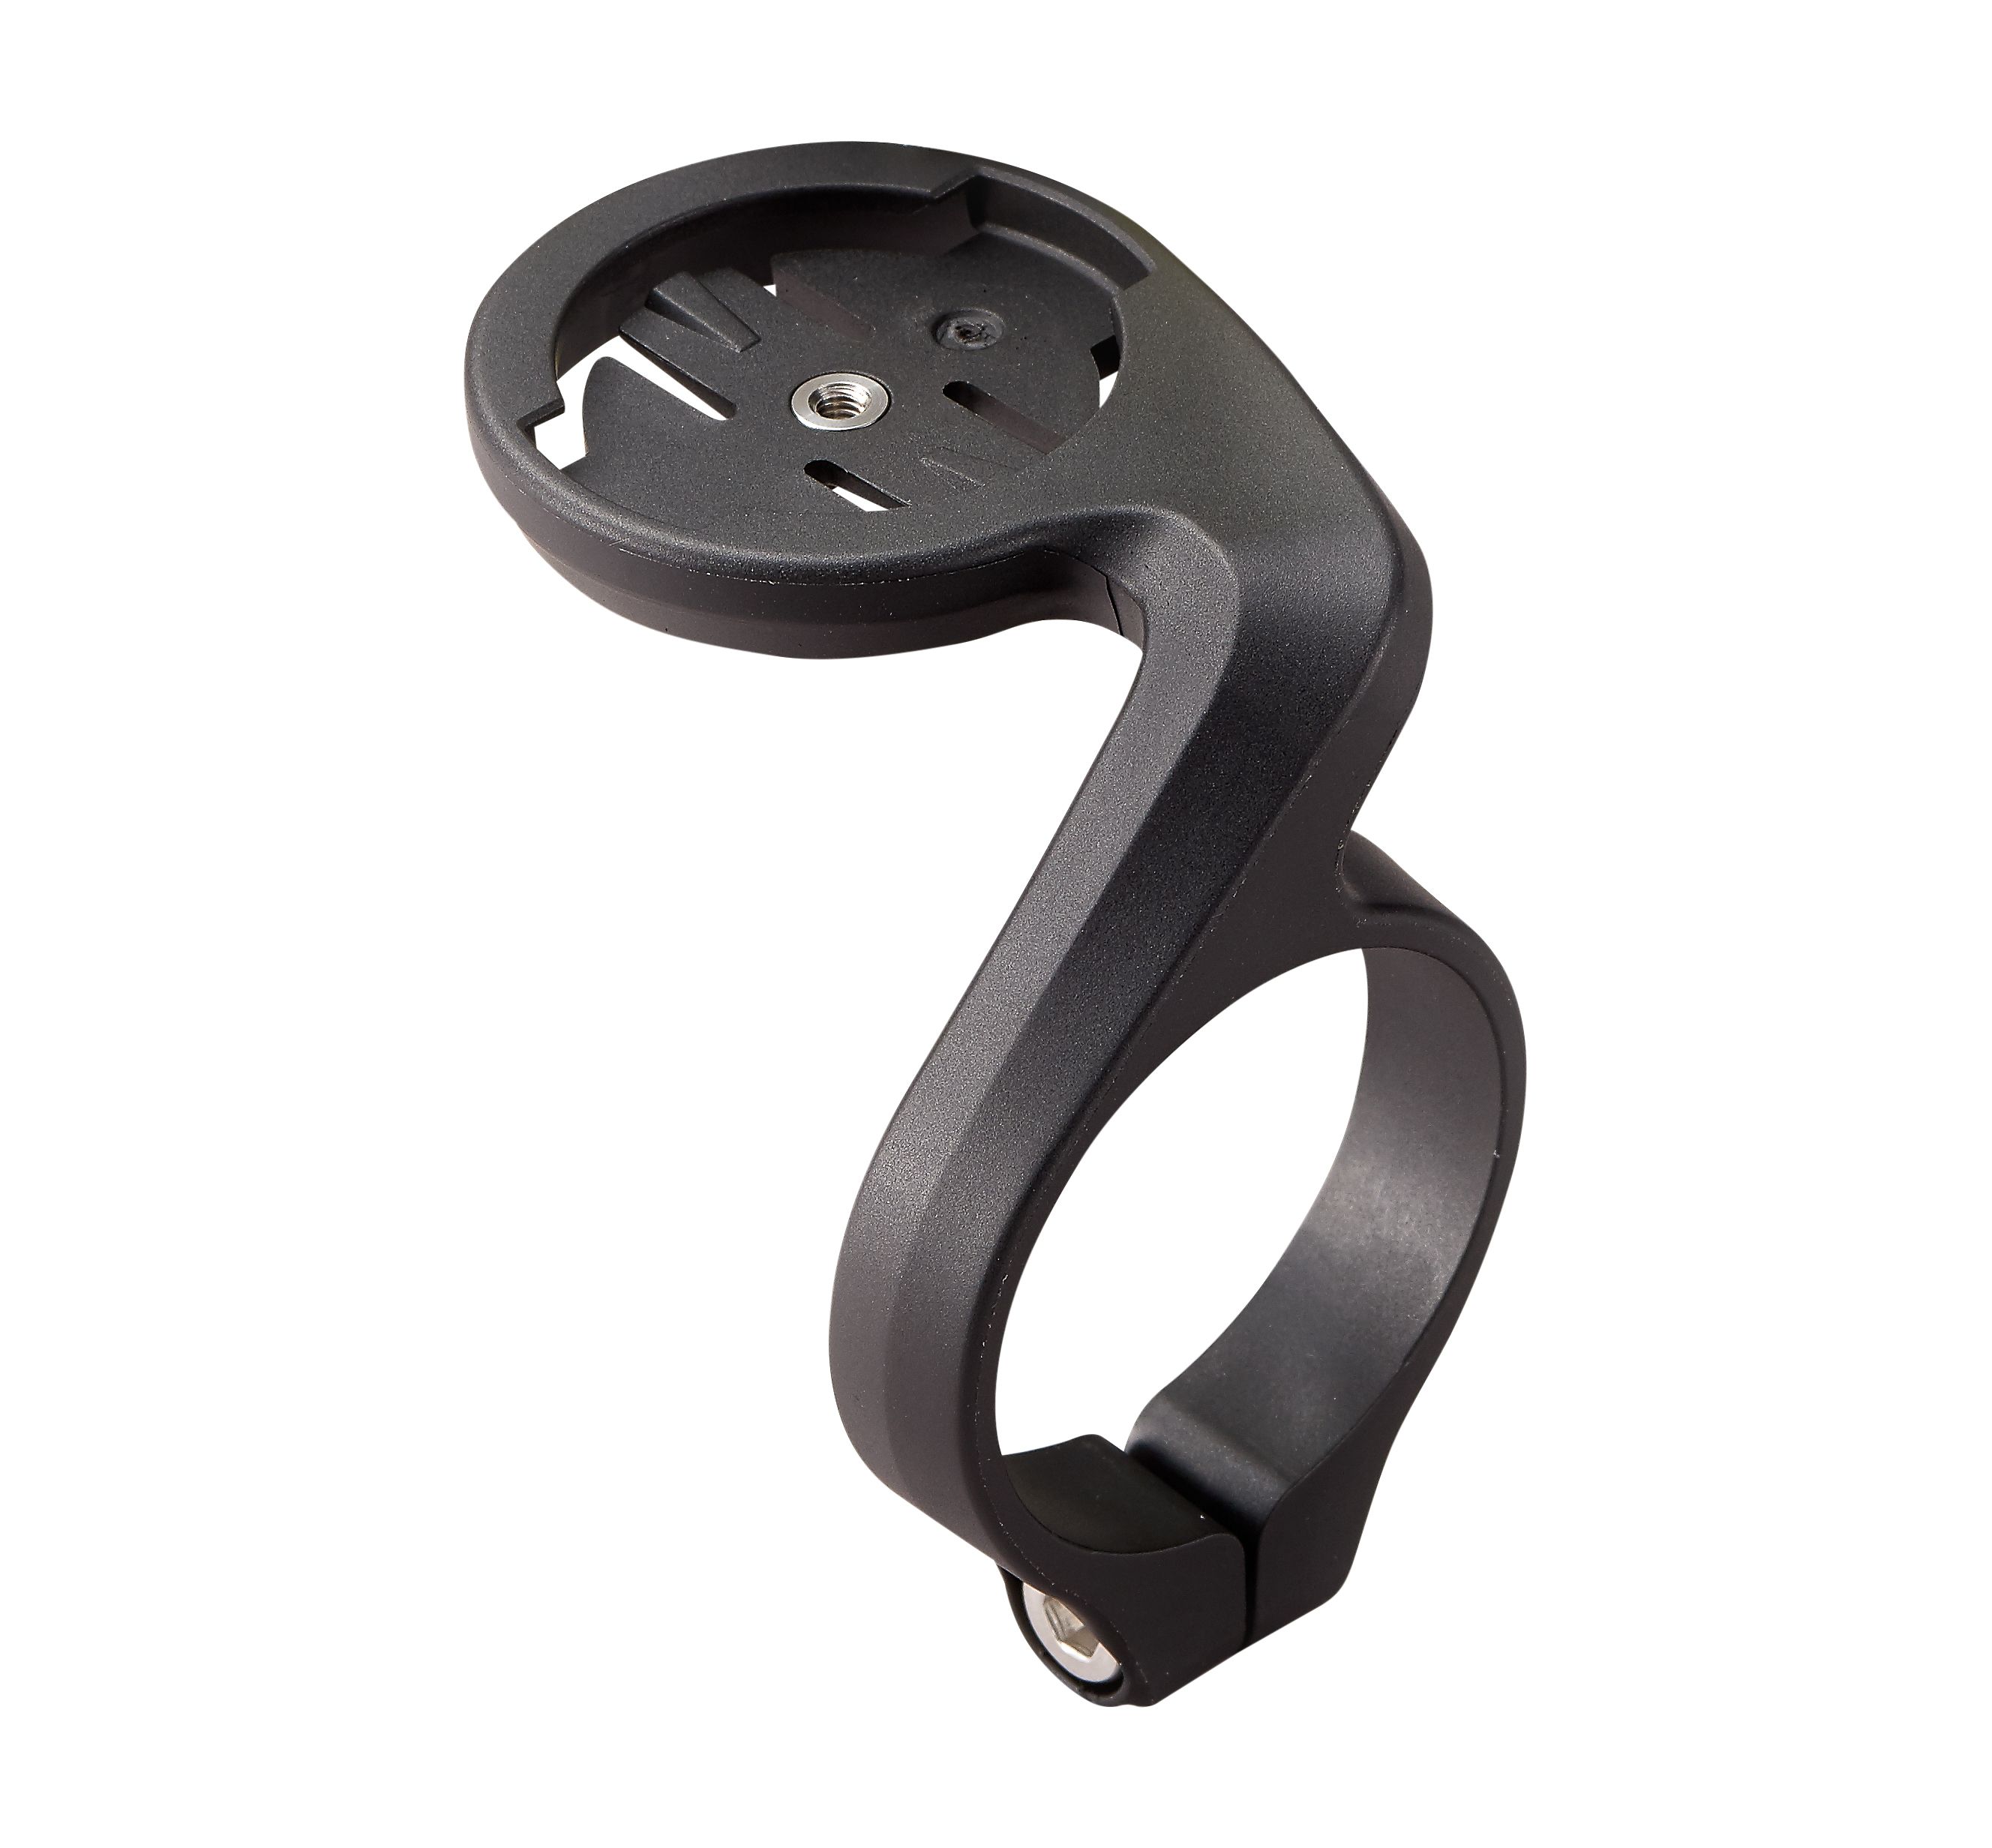 Specialized Turbo Connect Display Mount - £15 | Computer Accessories - Specialized/Roval | Cyclestore